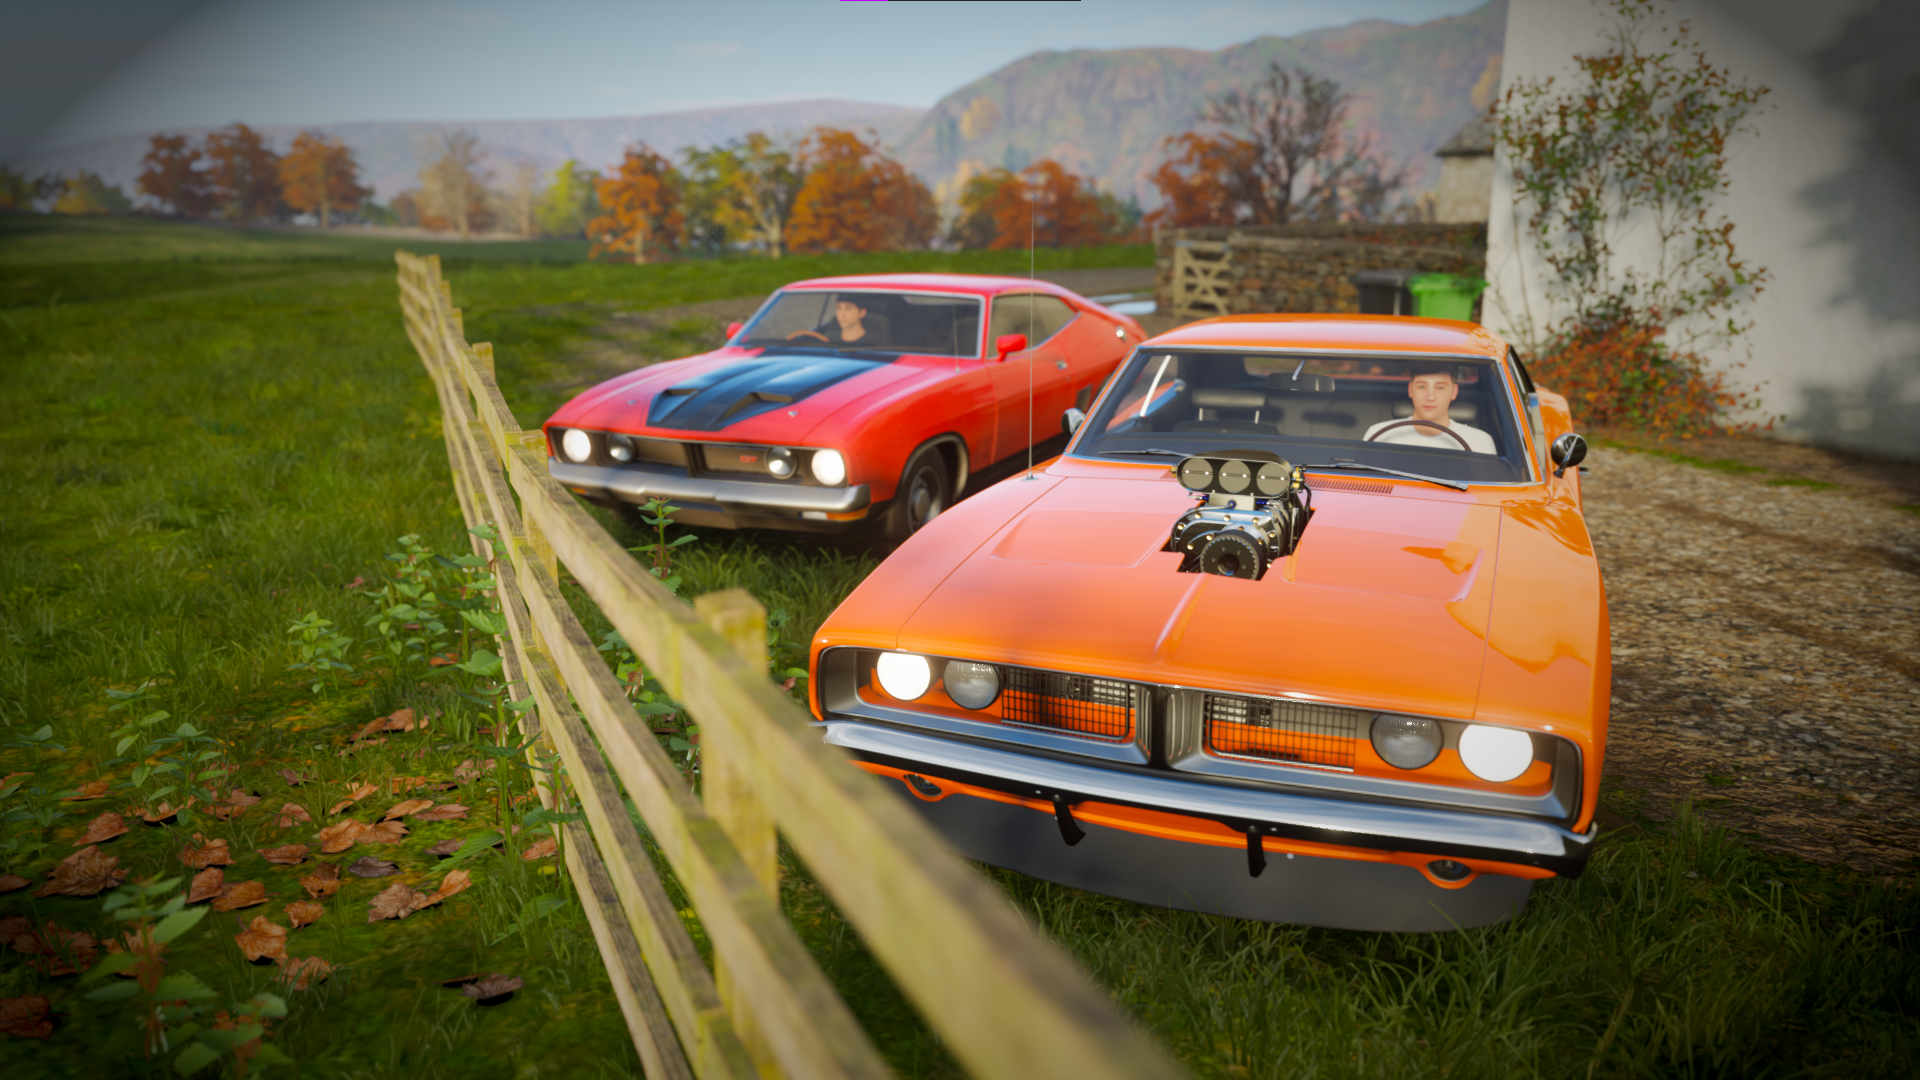 General 1920x1080 Forza Horizon 4 Forza Horizon red Dodge Charger Ford Falcon car video games